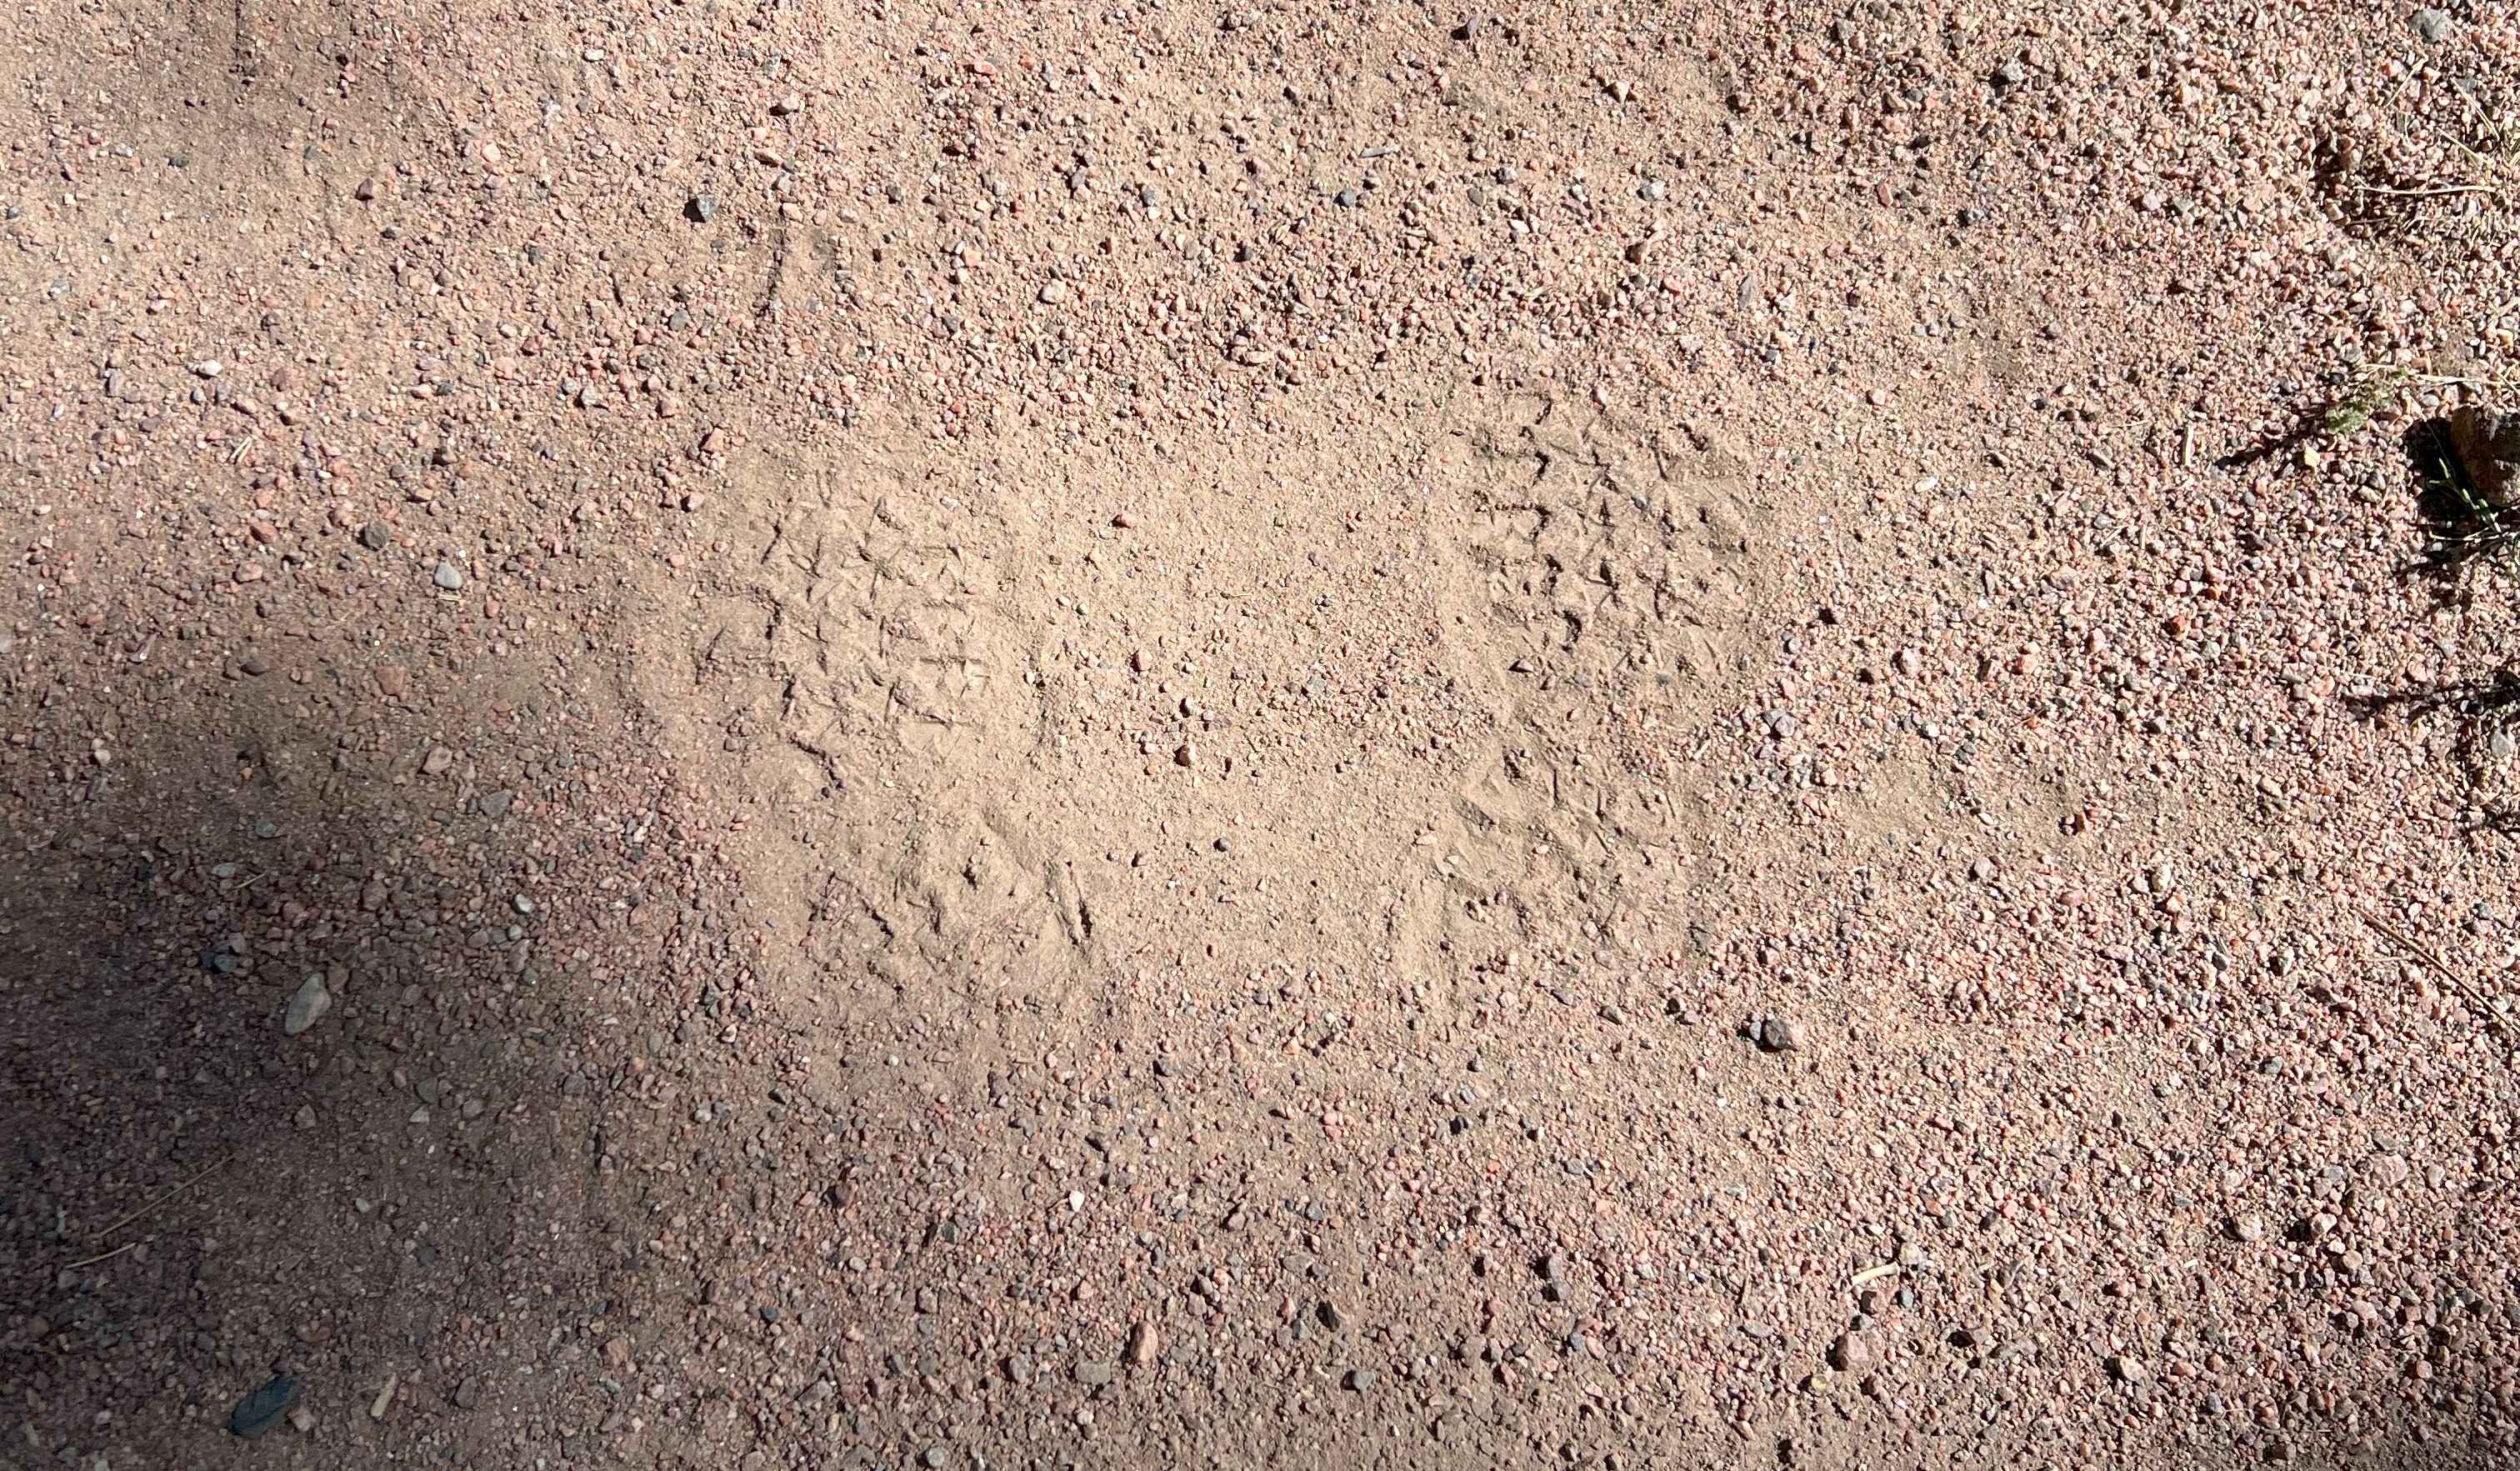 Outline of boot print in the dirt